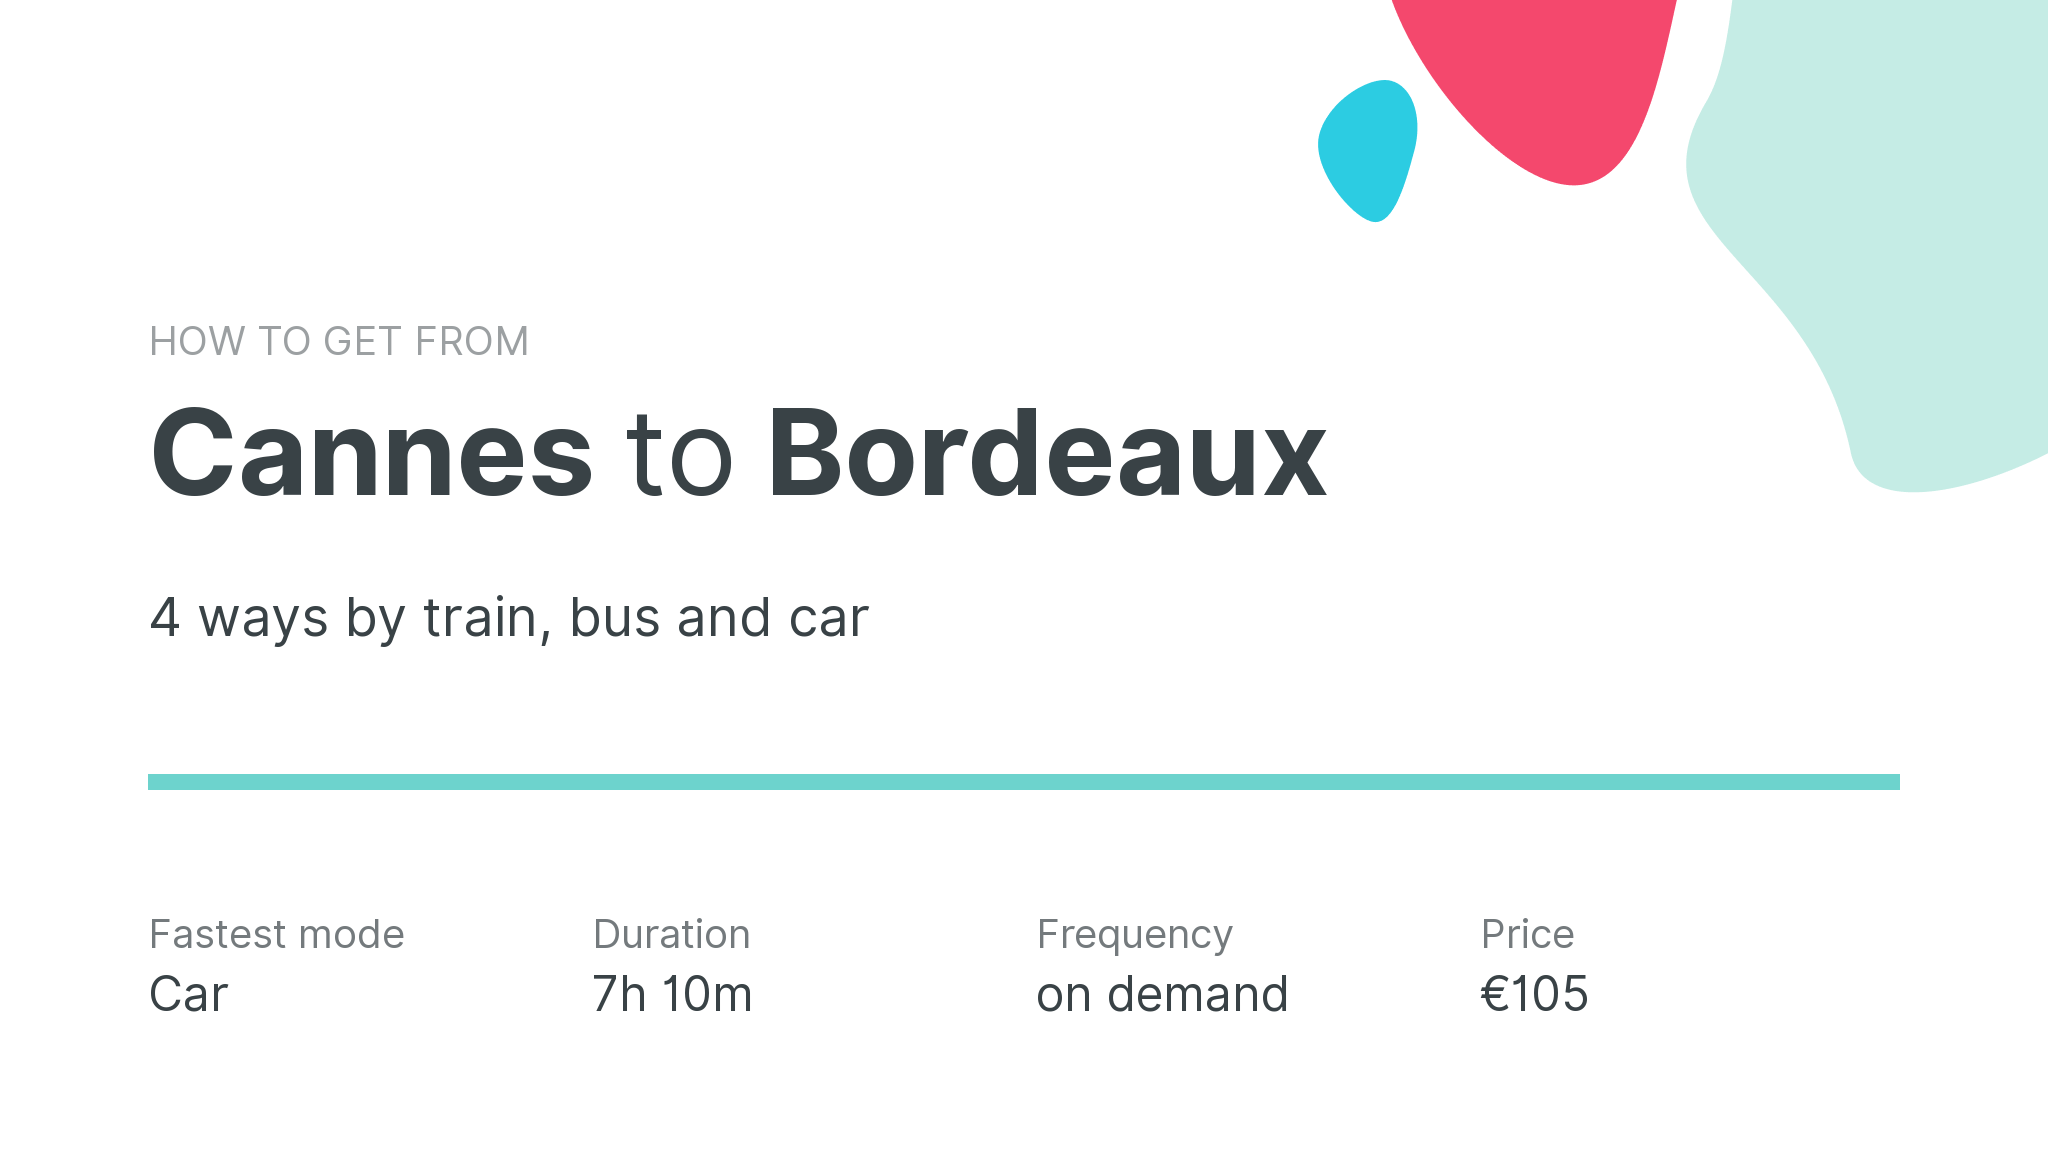 How do I get from Cannes to Bordeaux